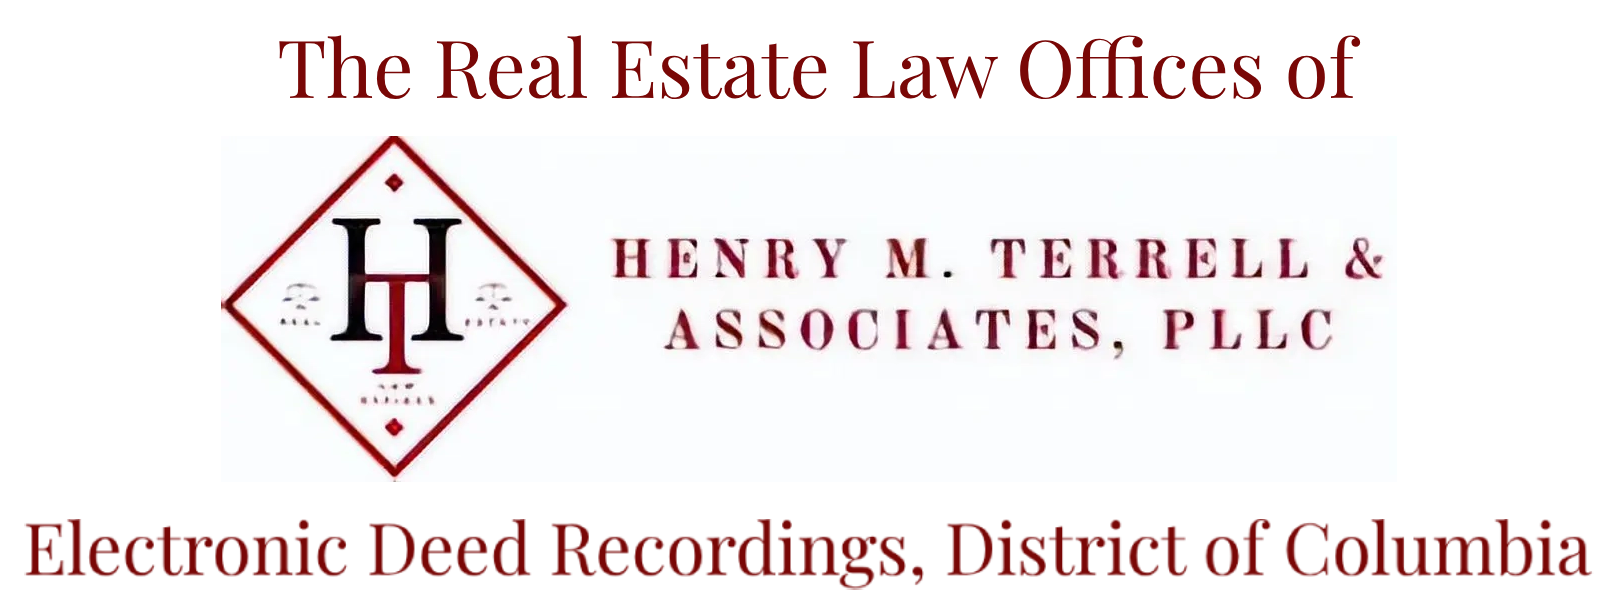 A red and white logo for the real estate law office of henry m. Teran & associates